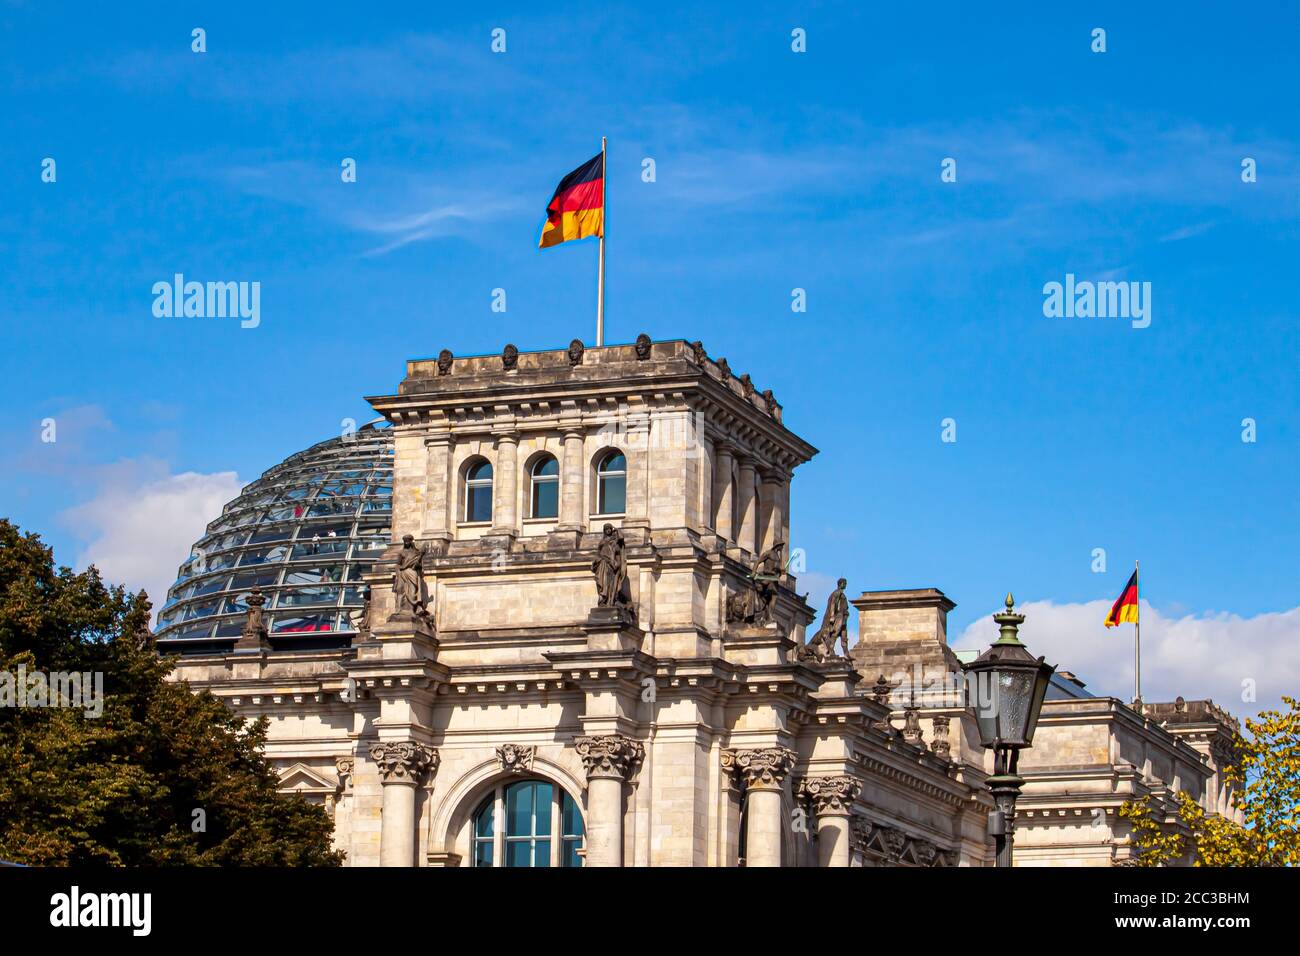 Close up isolated image of the historical landmark building  Reichstag (Imperial Diet) in Berlin. Image shows the exterior of the historic architectur Stock Photo